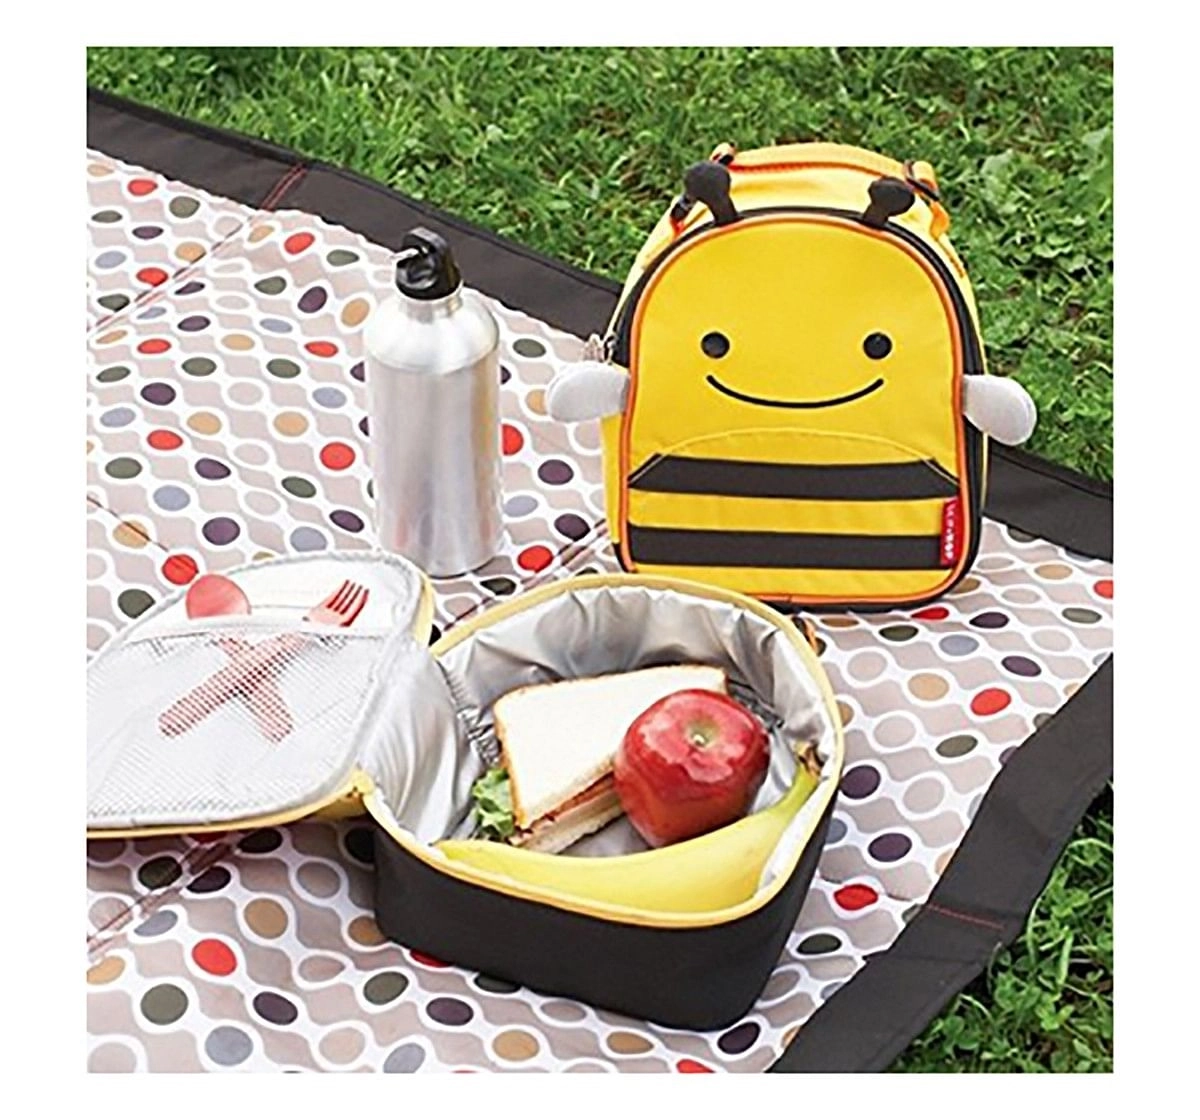 Skip Hop Zoo Insulated Waterproof Lunch Carry Bag -  Bee New Born for Kids age 3Y+ 